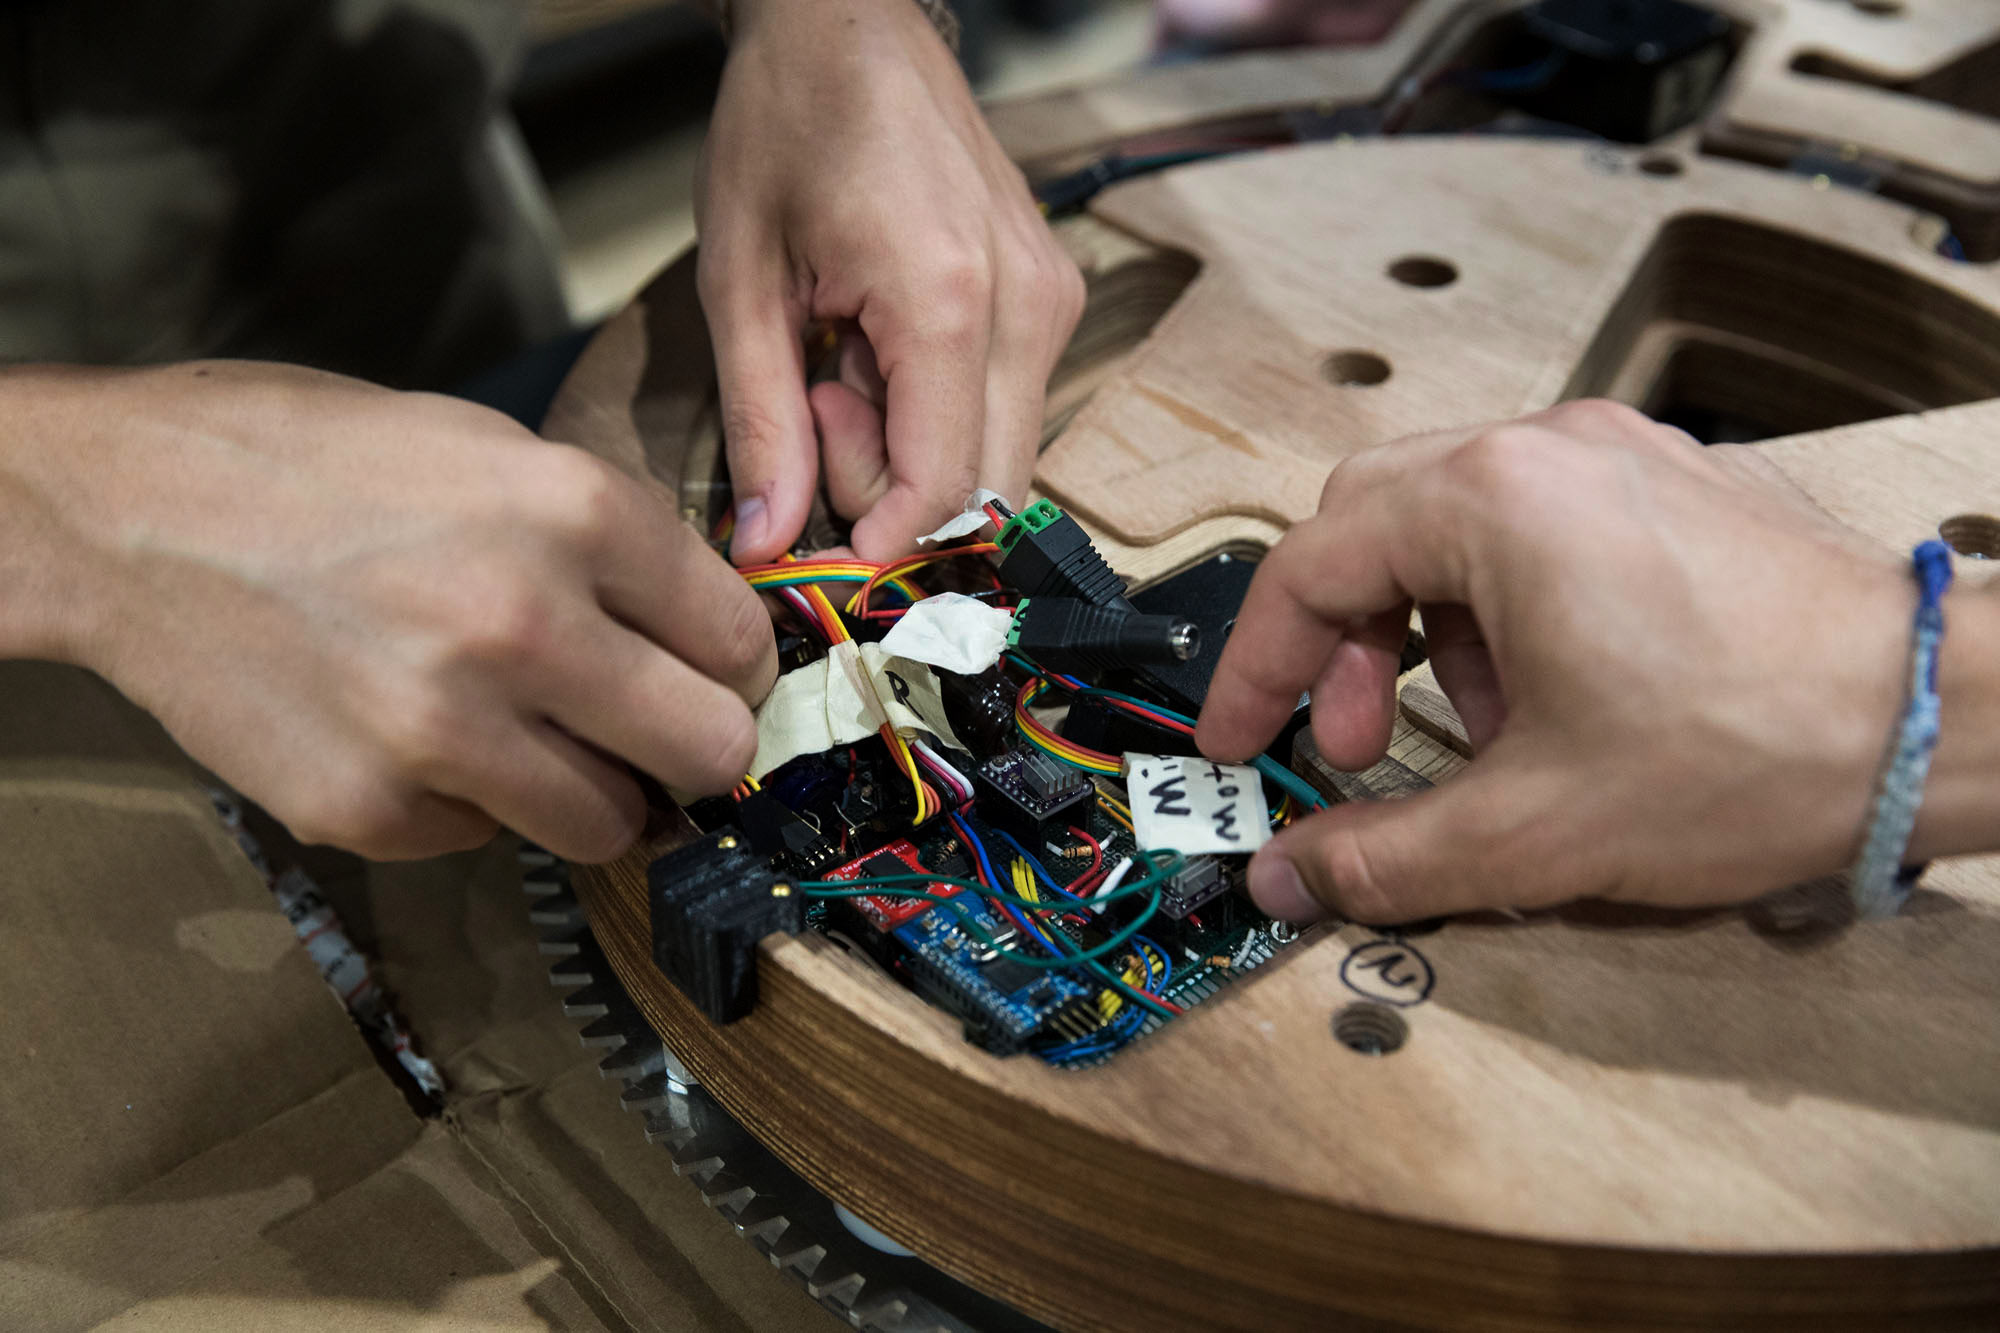 Hands placing electronics in the back of an unfinished wooden clock